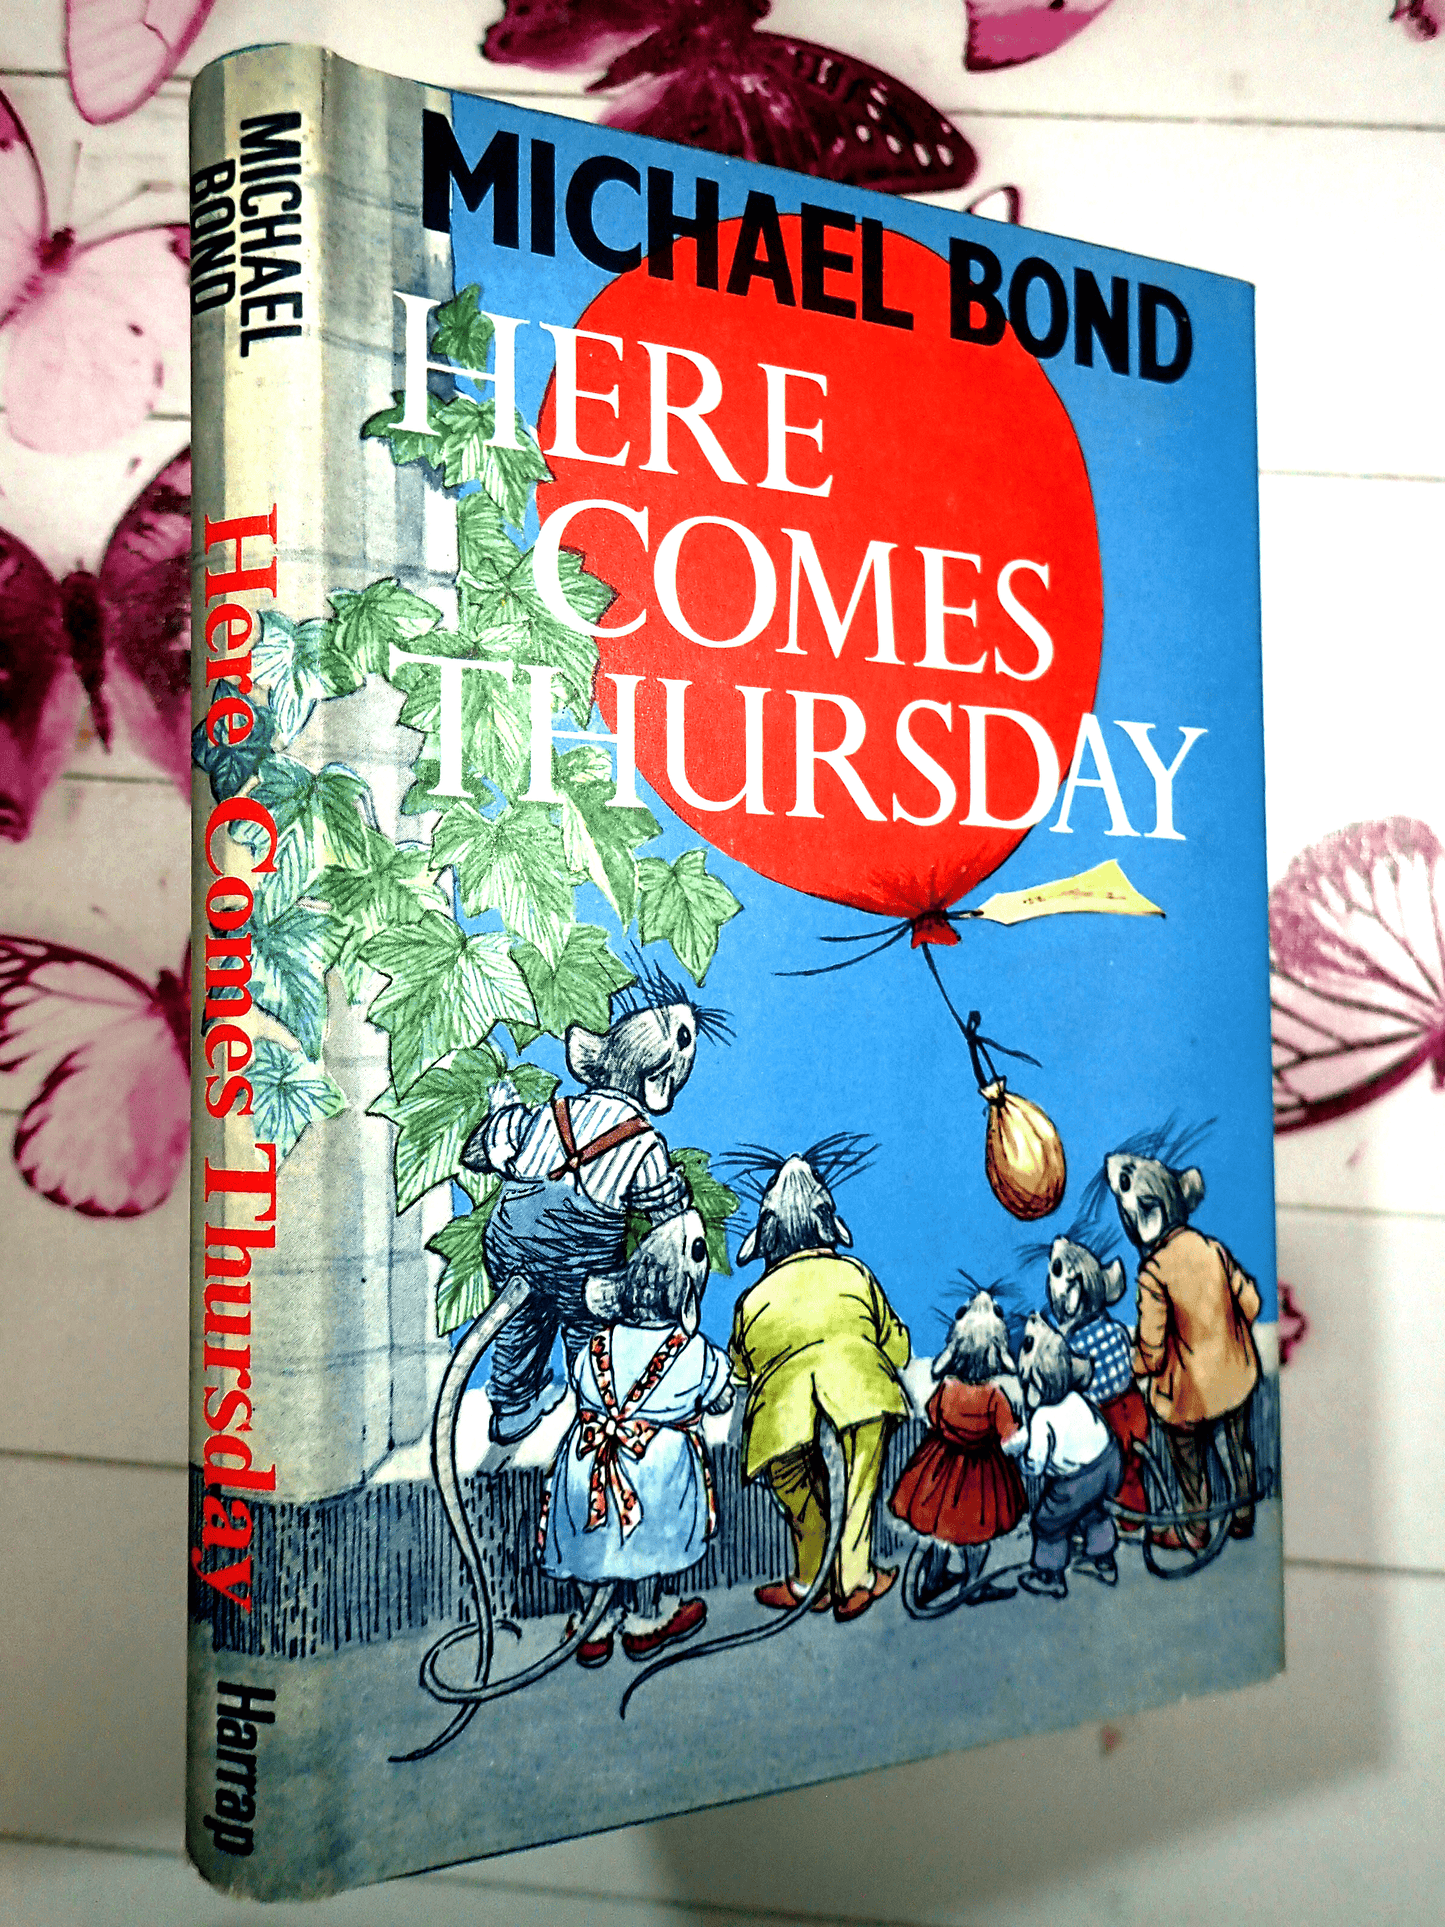 Here Comes Thursday Michael Bond Vintage Children's Book First Edition 1970's